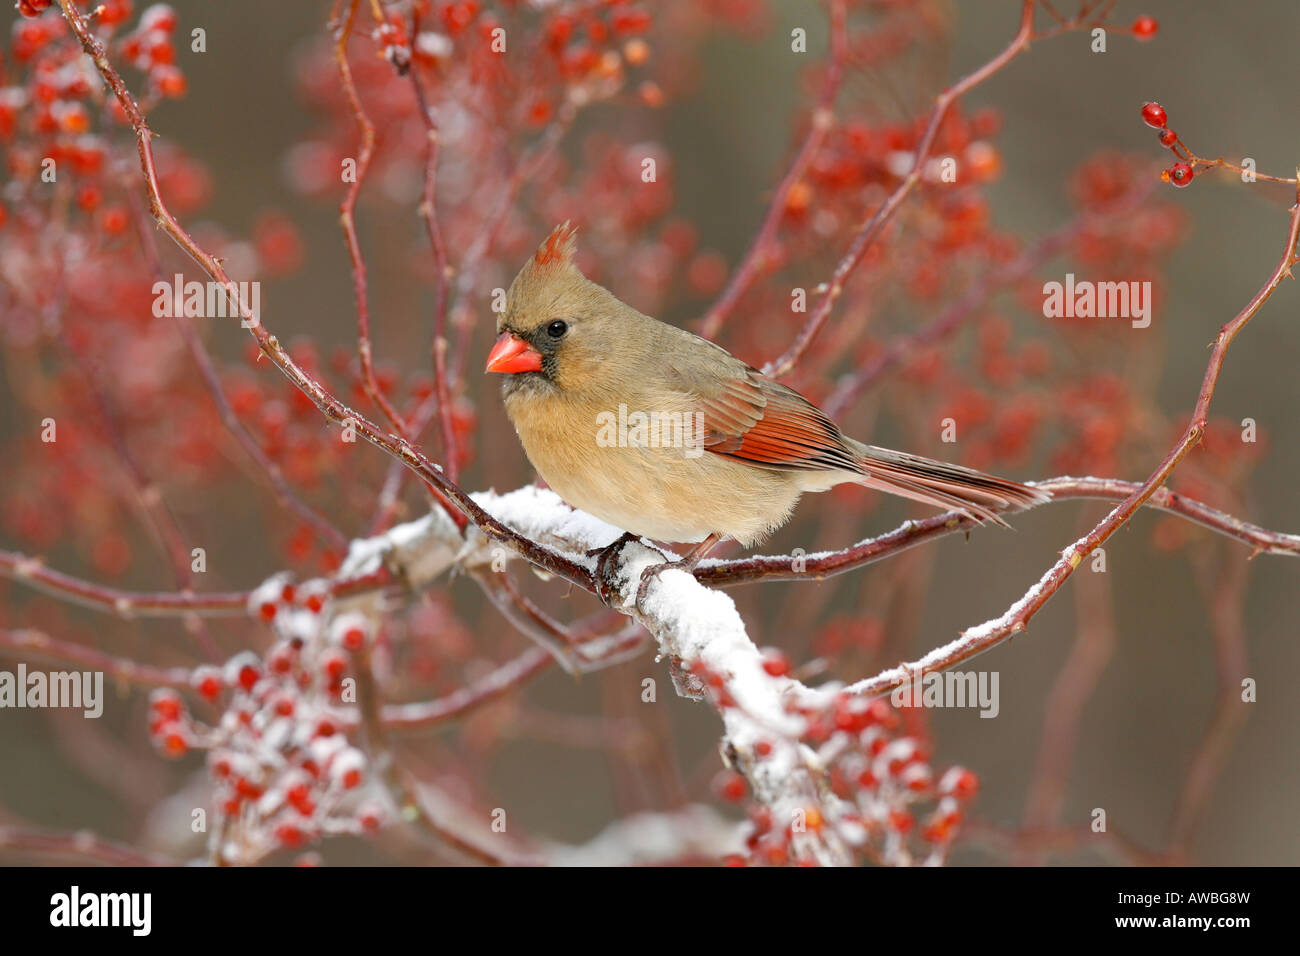 Female Northern Cardinal Perched in Multiflora Rose Berries with Snow Stock Photo